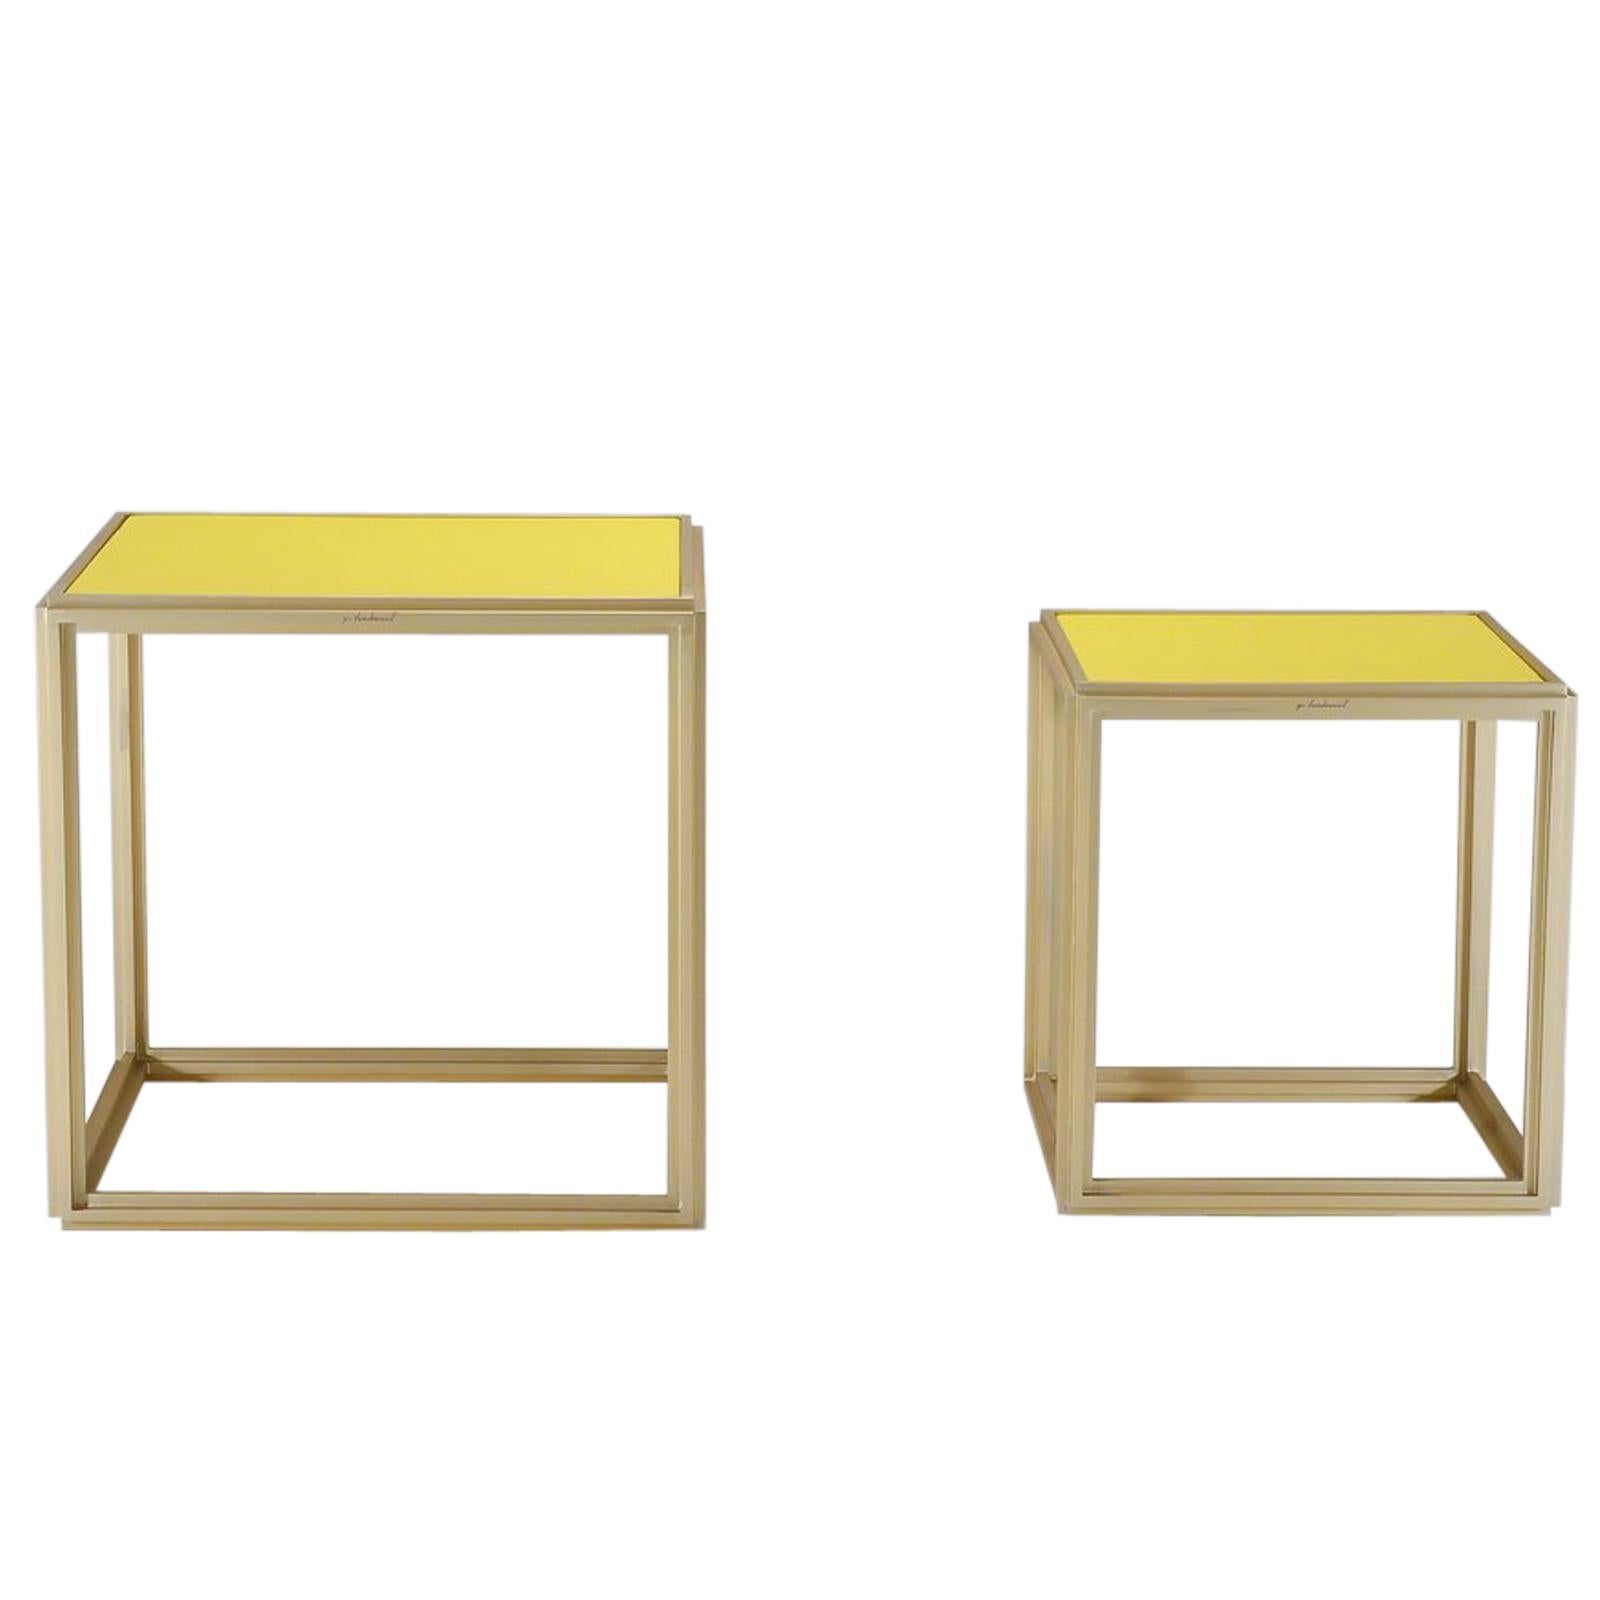 Collection of Two Brass Low Tables, Leather Top, One of a Kind by P. Tendercool For Sale